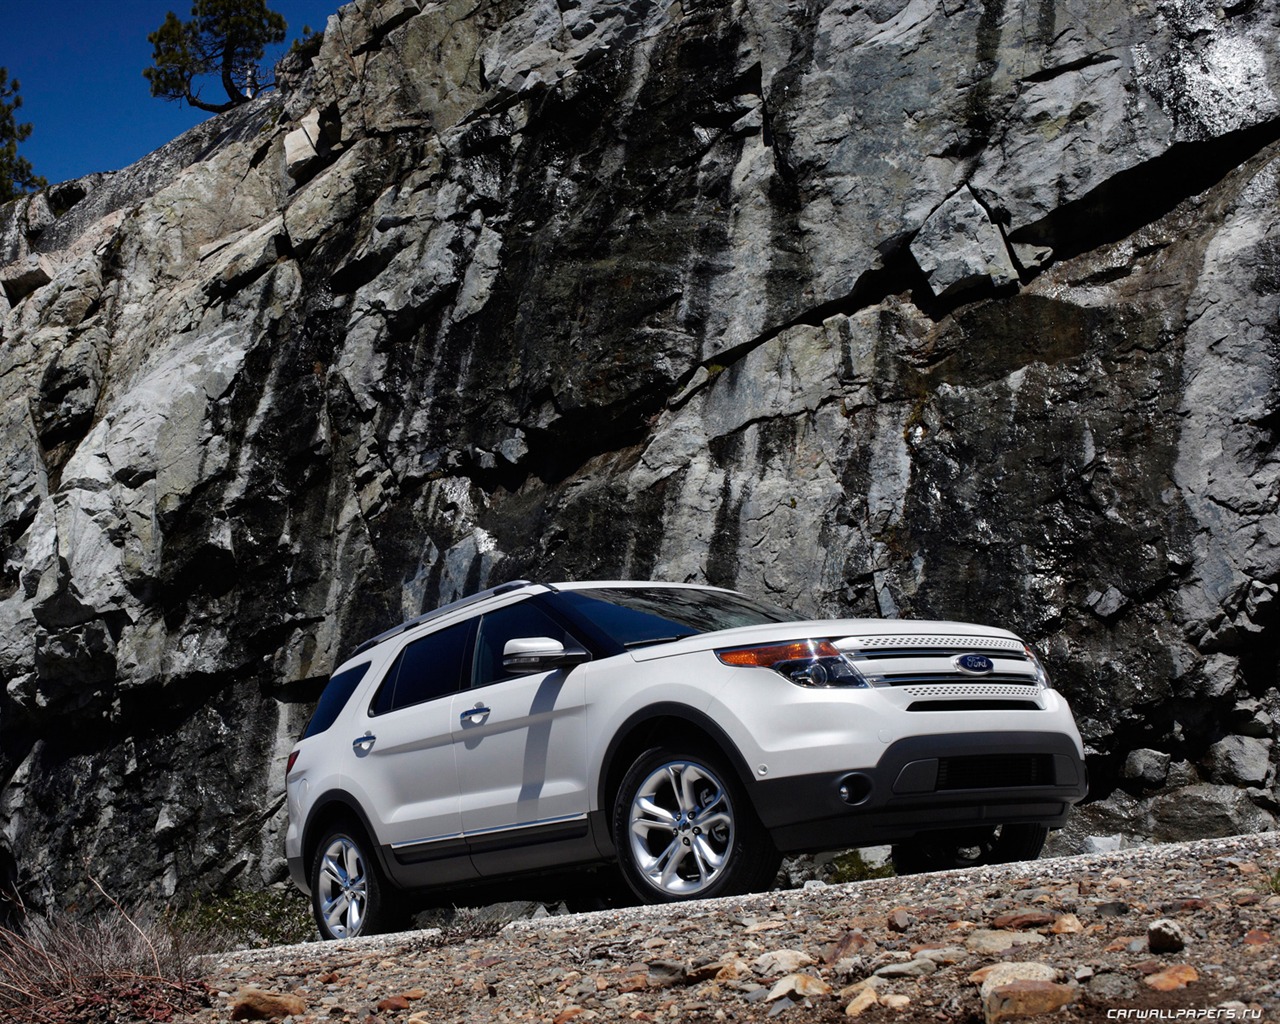 Ford Explorer Limited - 2011 福特 #12 - 1280x1024